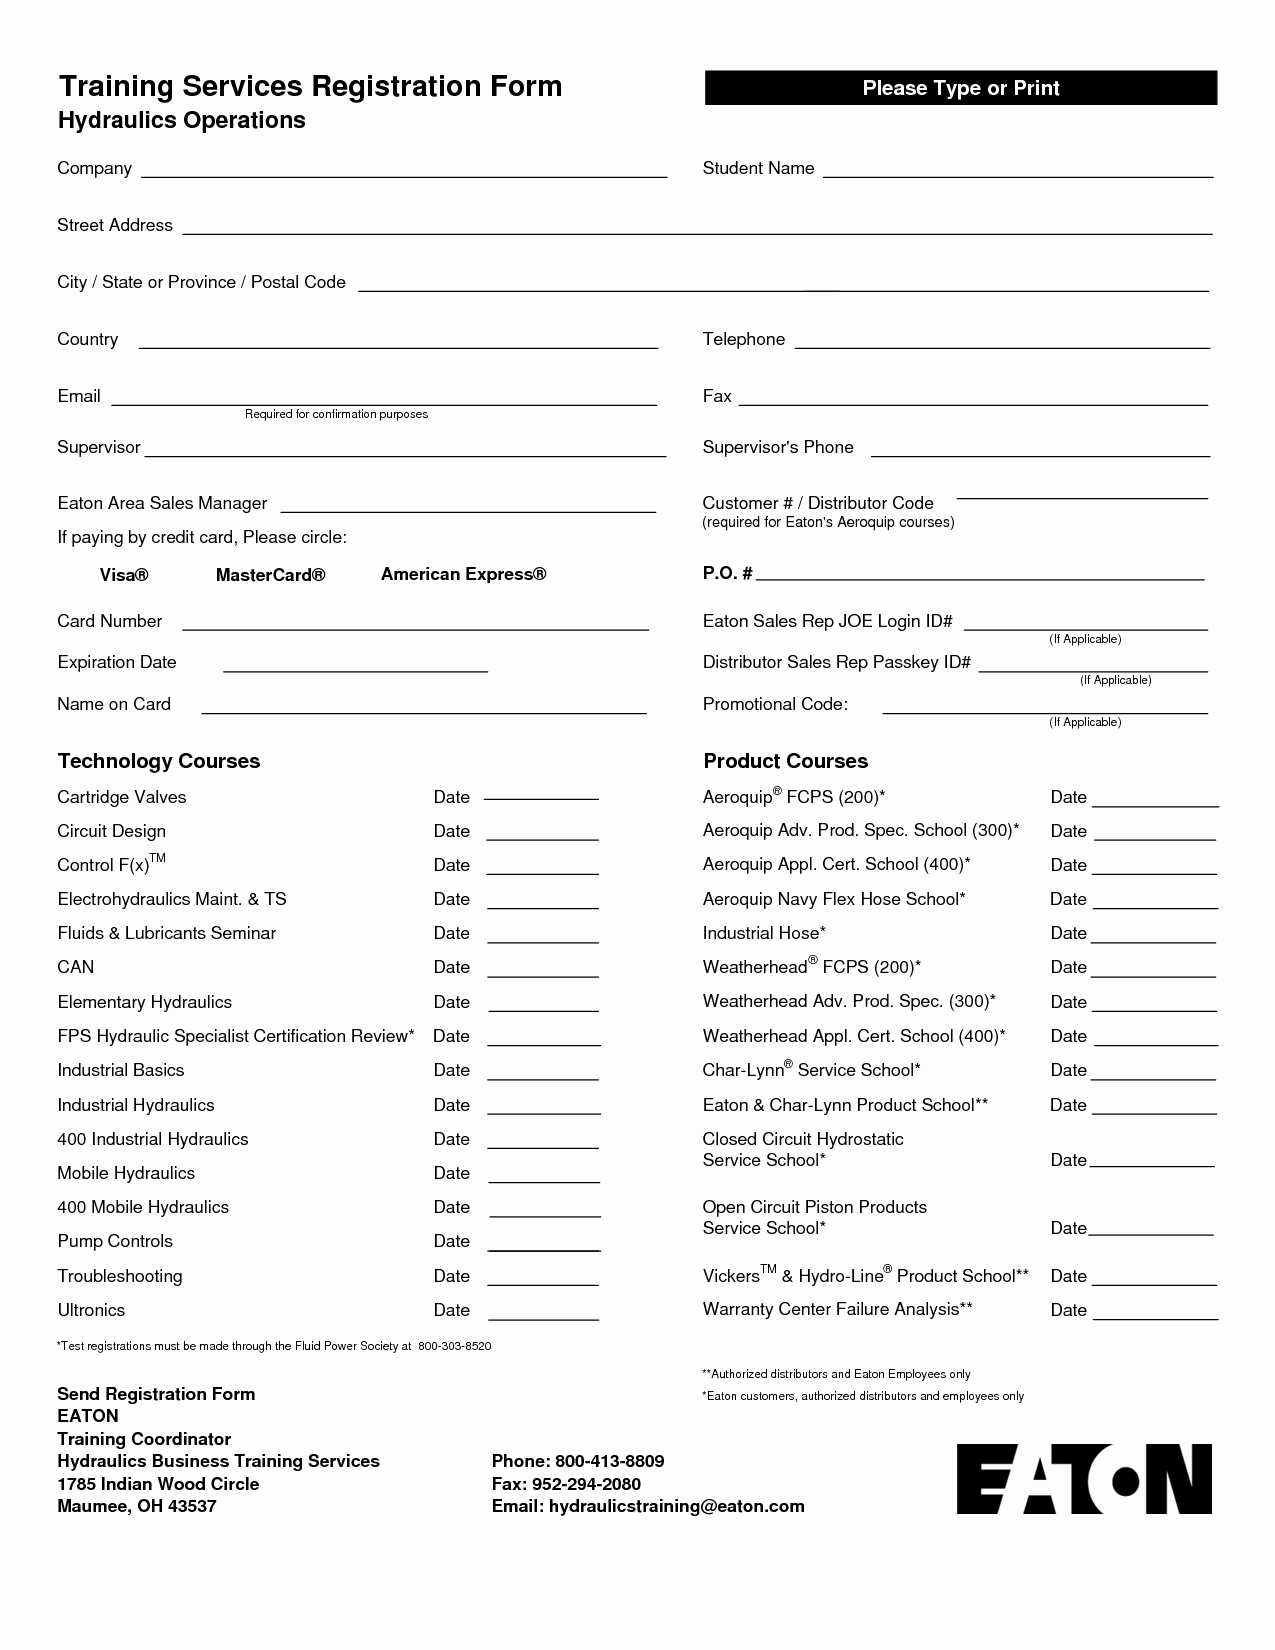 Event Registration form Template Word Lovely Seminar Registration form Template Word Free Picture event